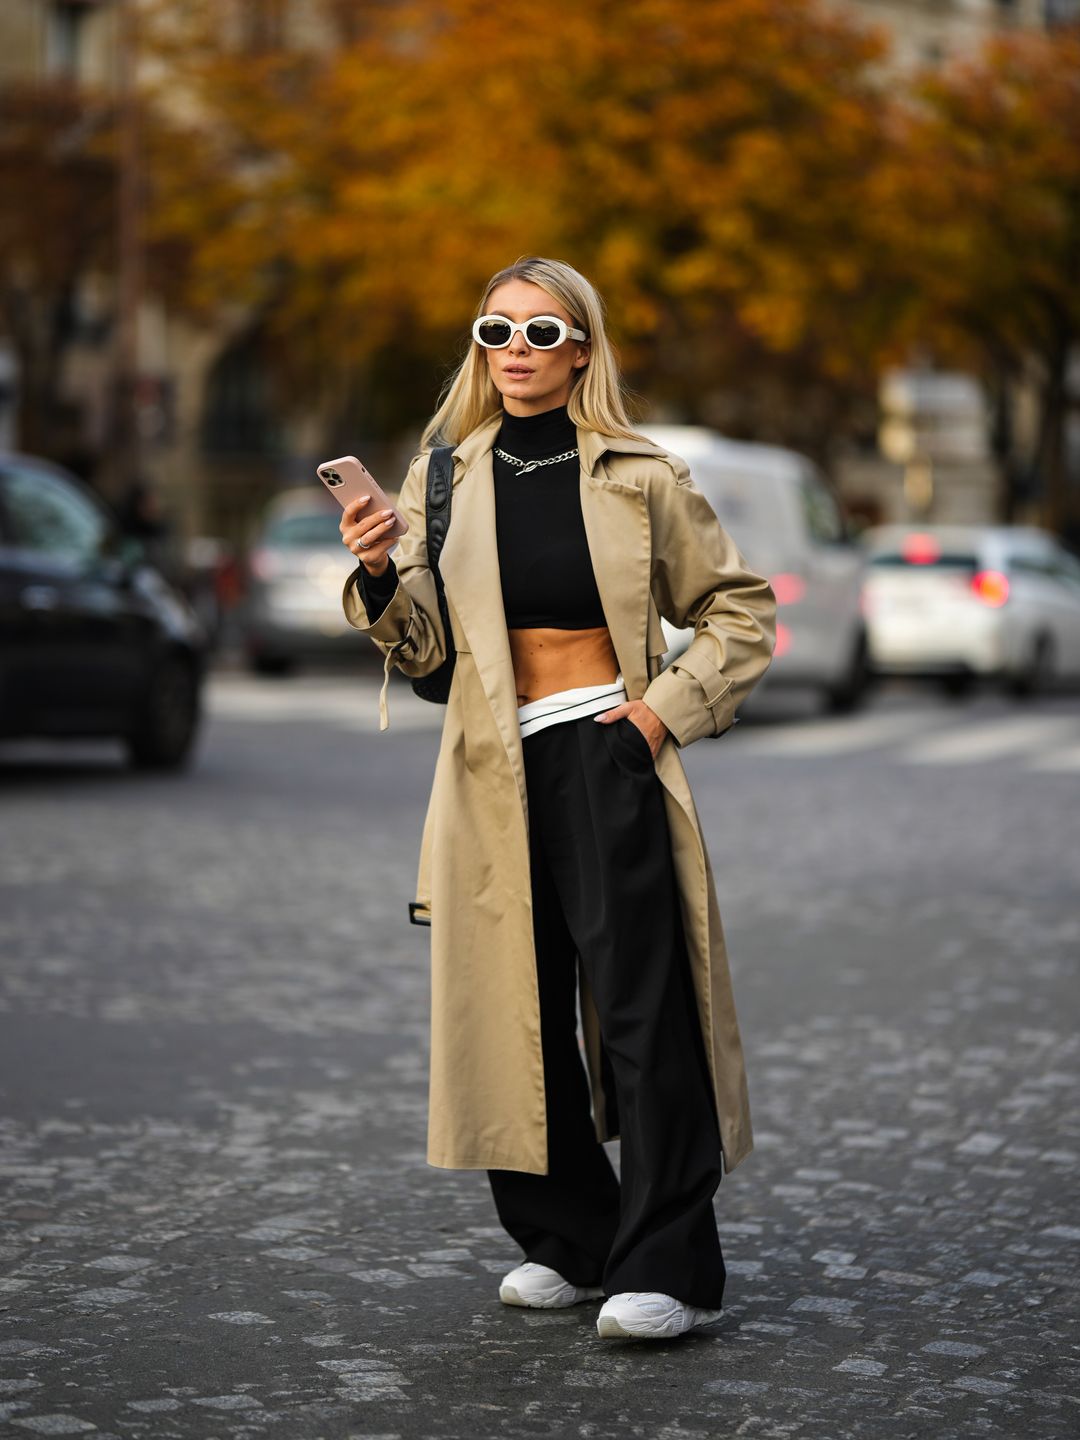 How to style trench coats: 14 outfits to recreate